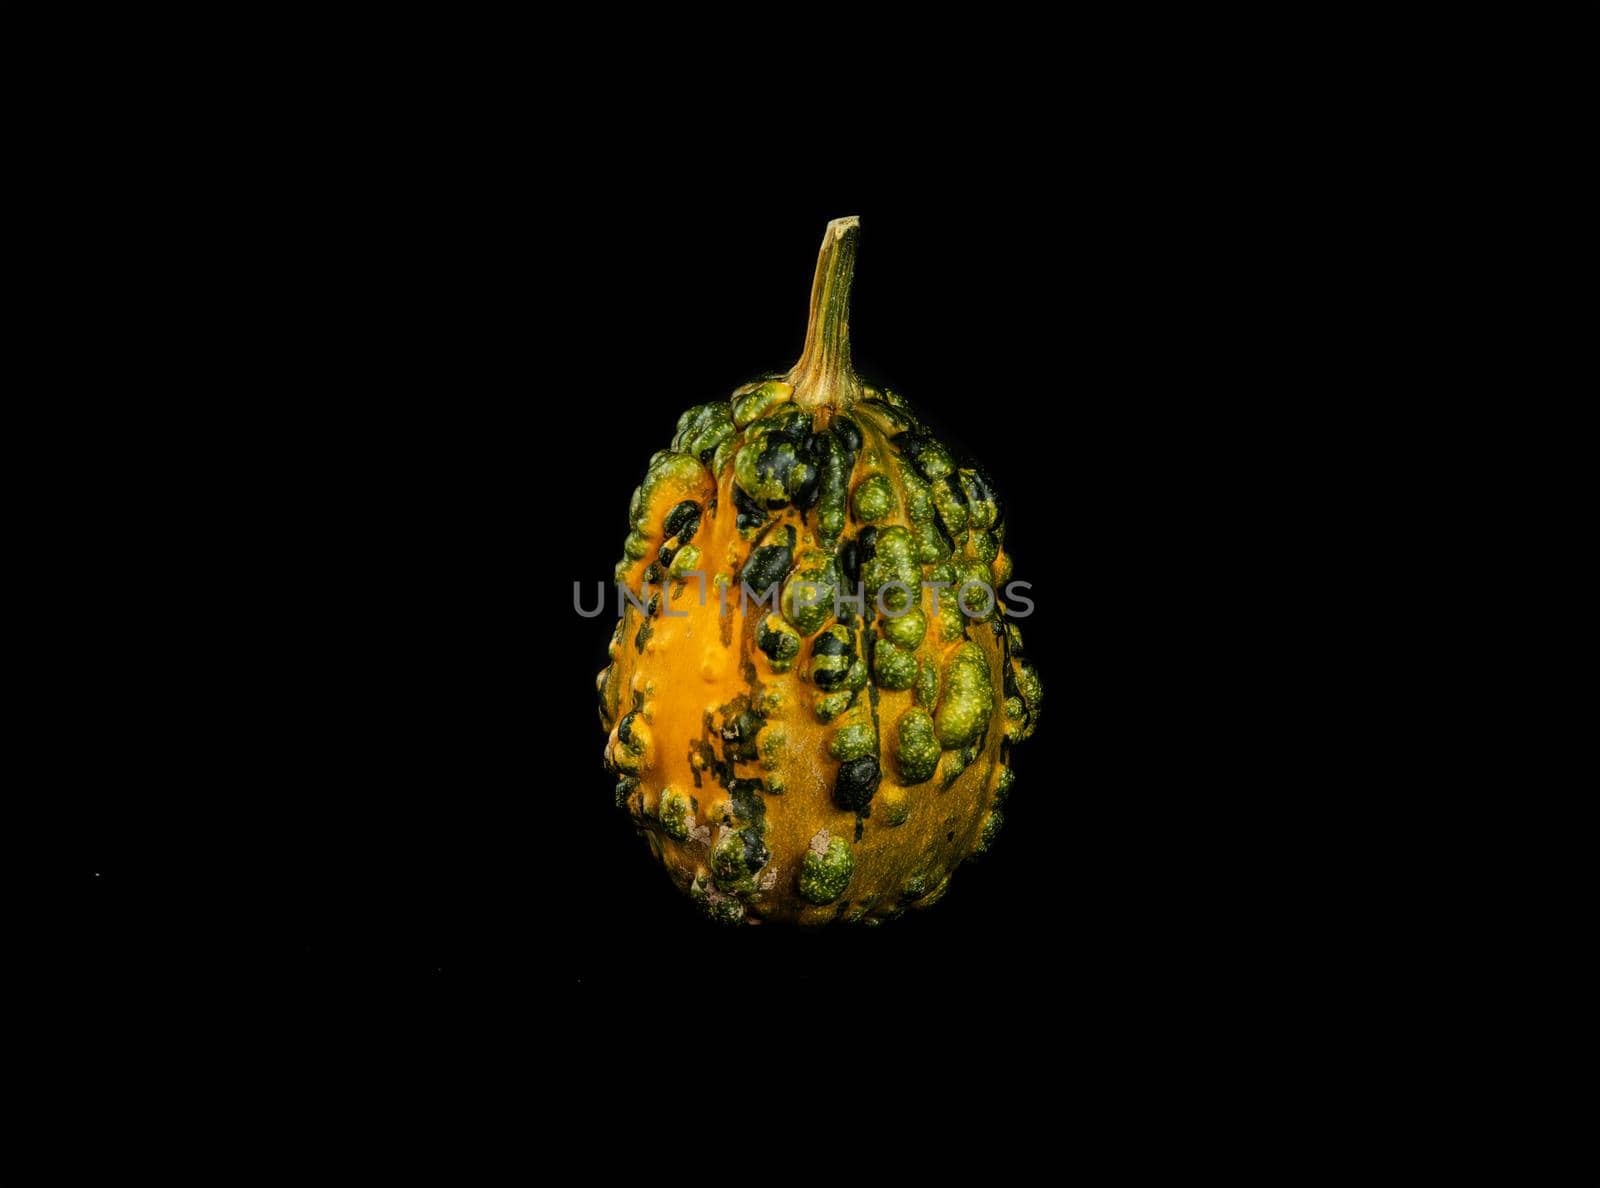 Vegetarian food. Isolated pumpkin on black background, cut out object. Healthy food concept, seasonal menu, autumn menu posters. Holidays Thanksgiving and Halloween